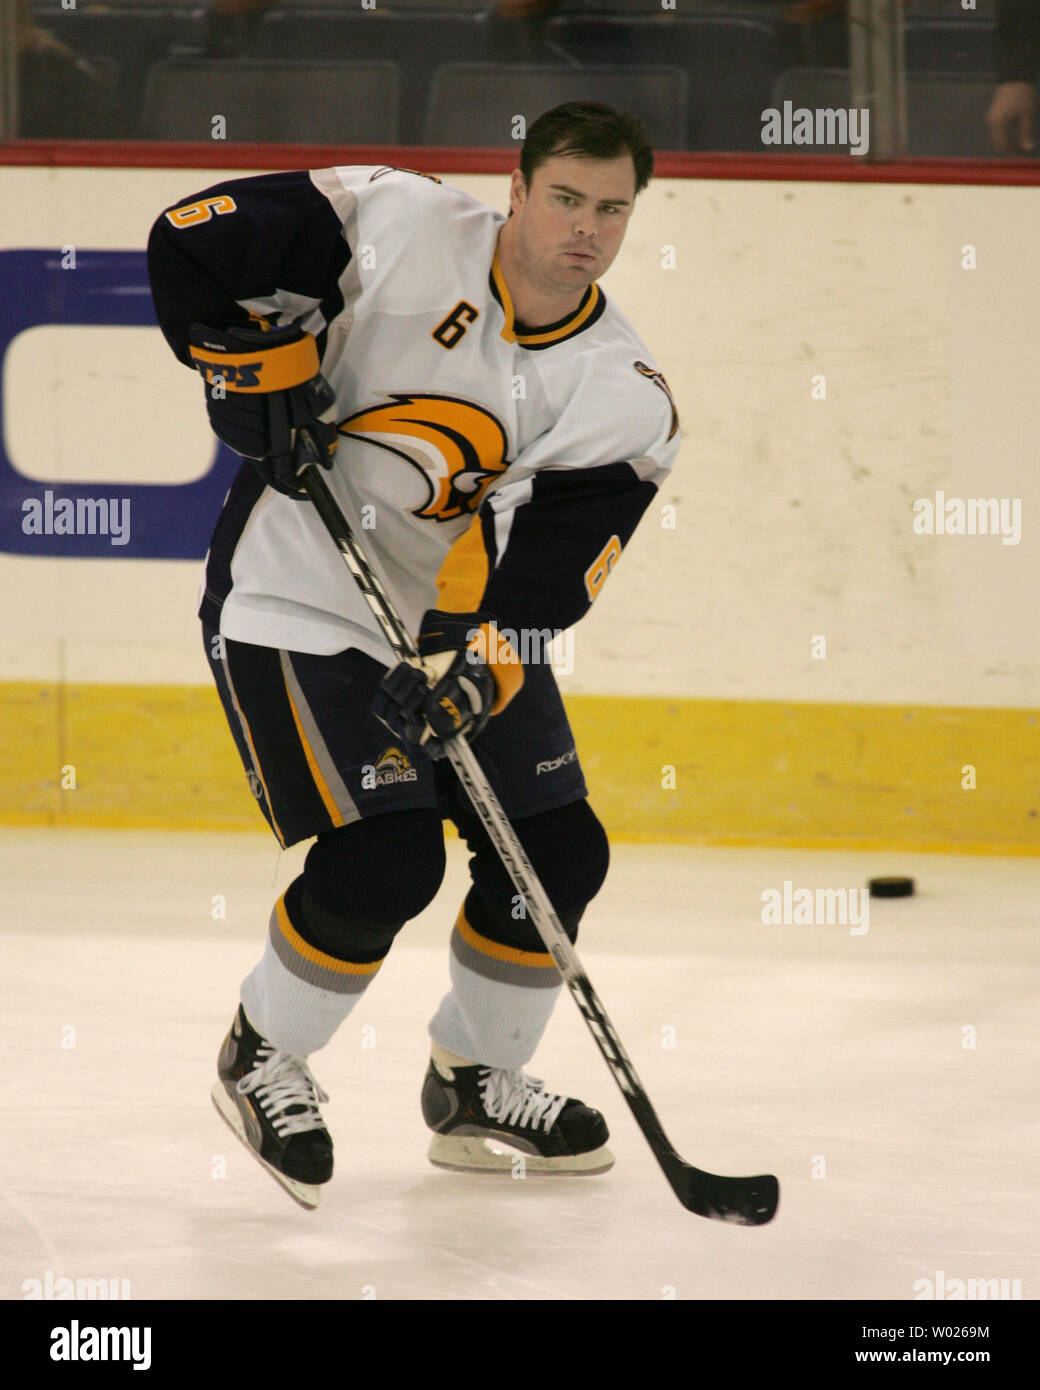 Buffalo Sabres' Sabres Jaroslav Spacek of the Czech Republic warms up  before the start of the game against the Pittsburgh Penguins at Mellon  Arena in Pittsburgh, Pennsylvania on April 3, 2007. (UPI